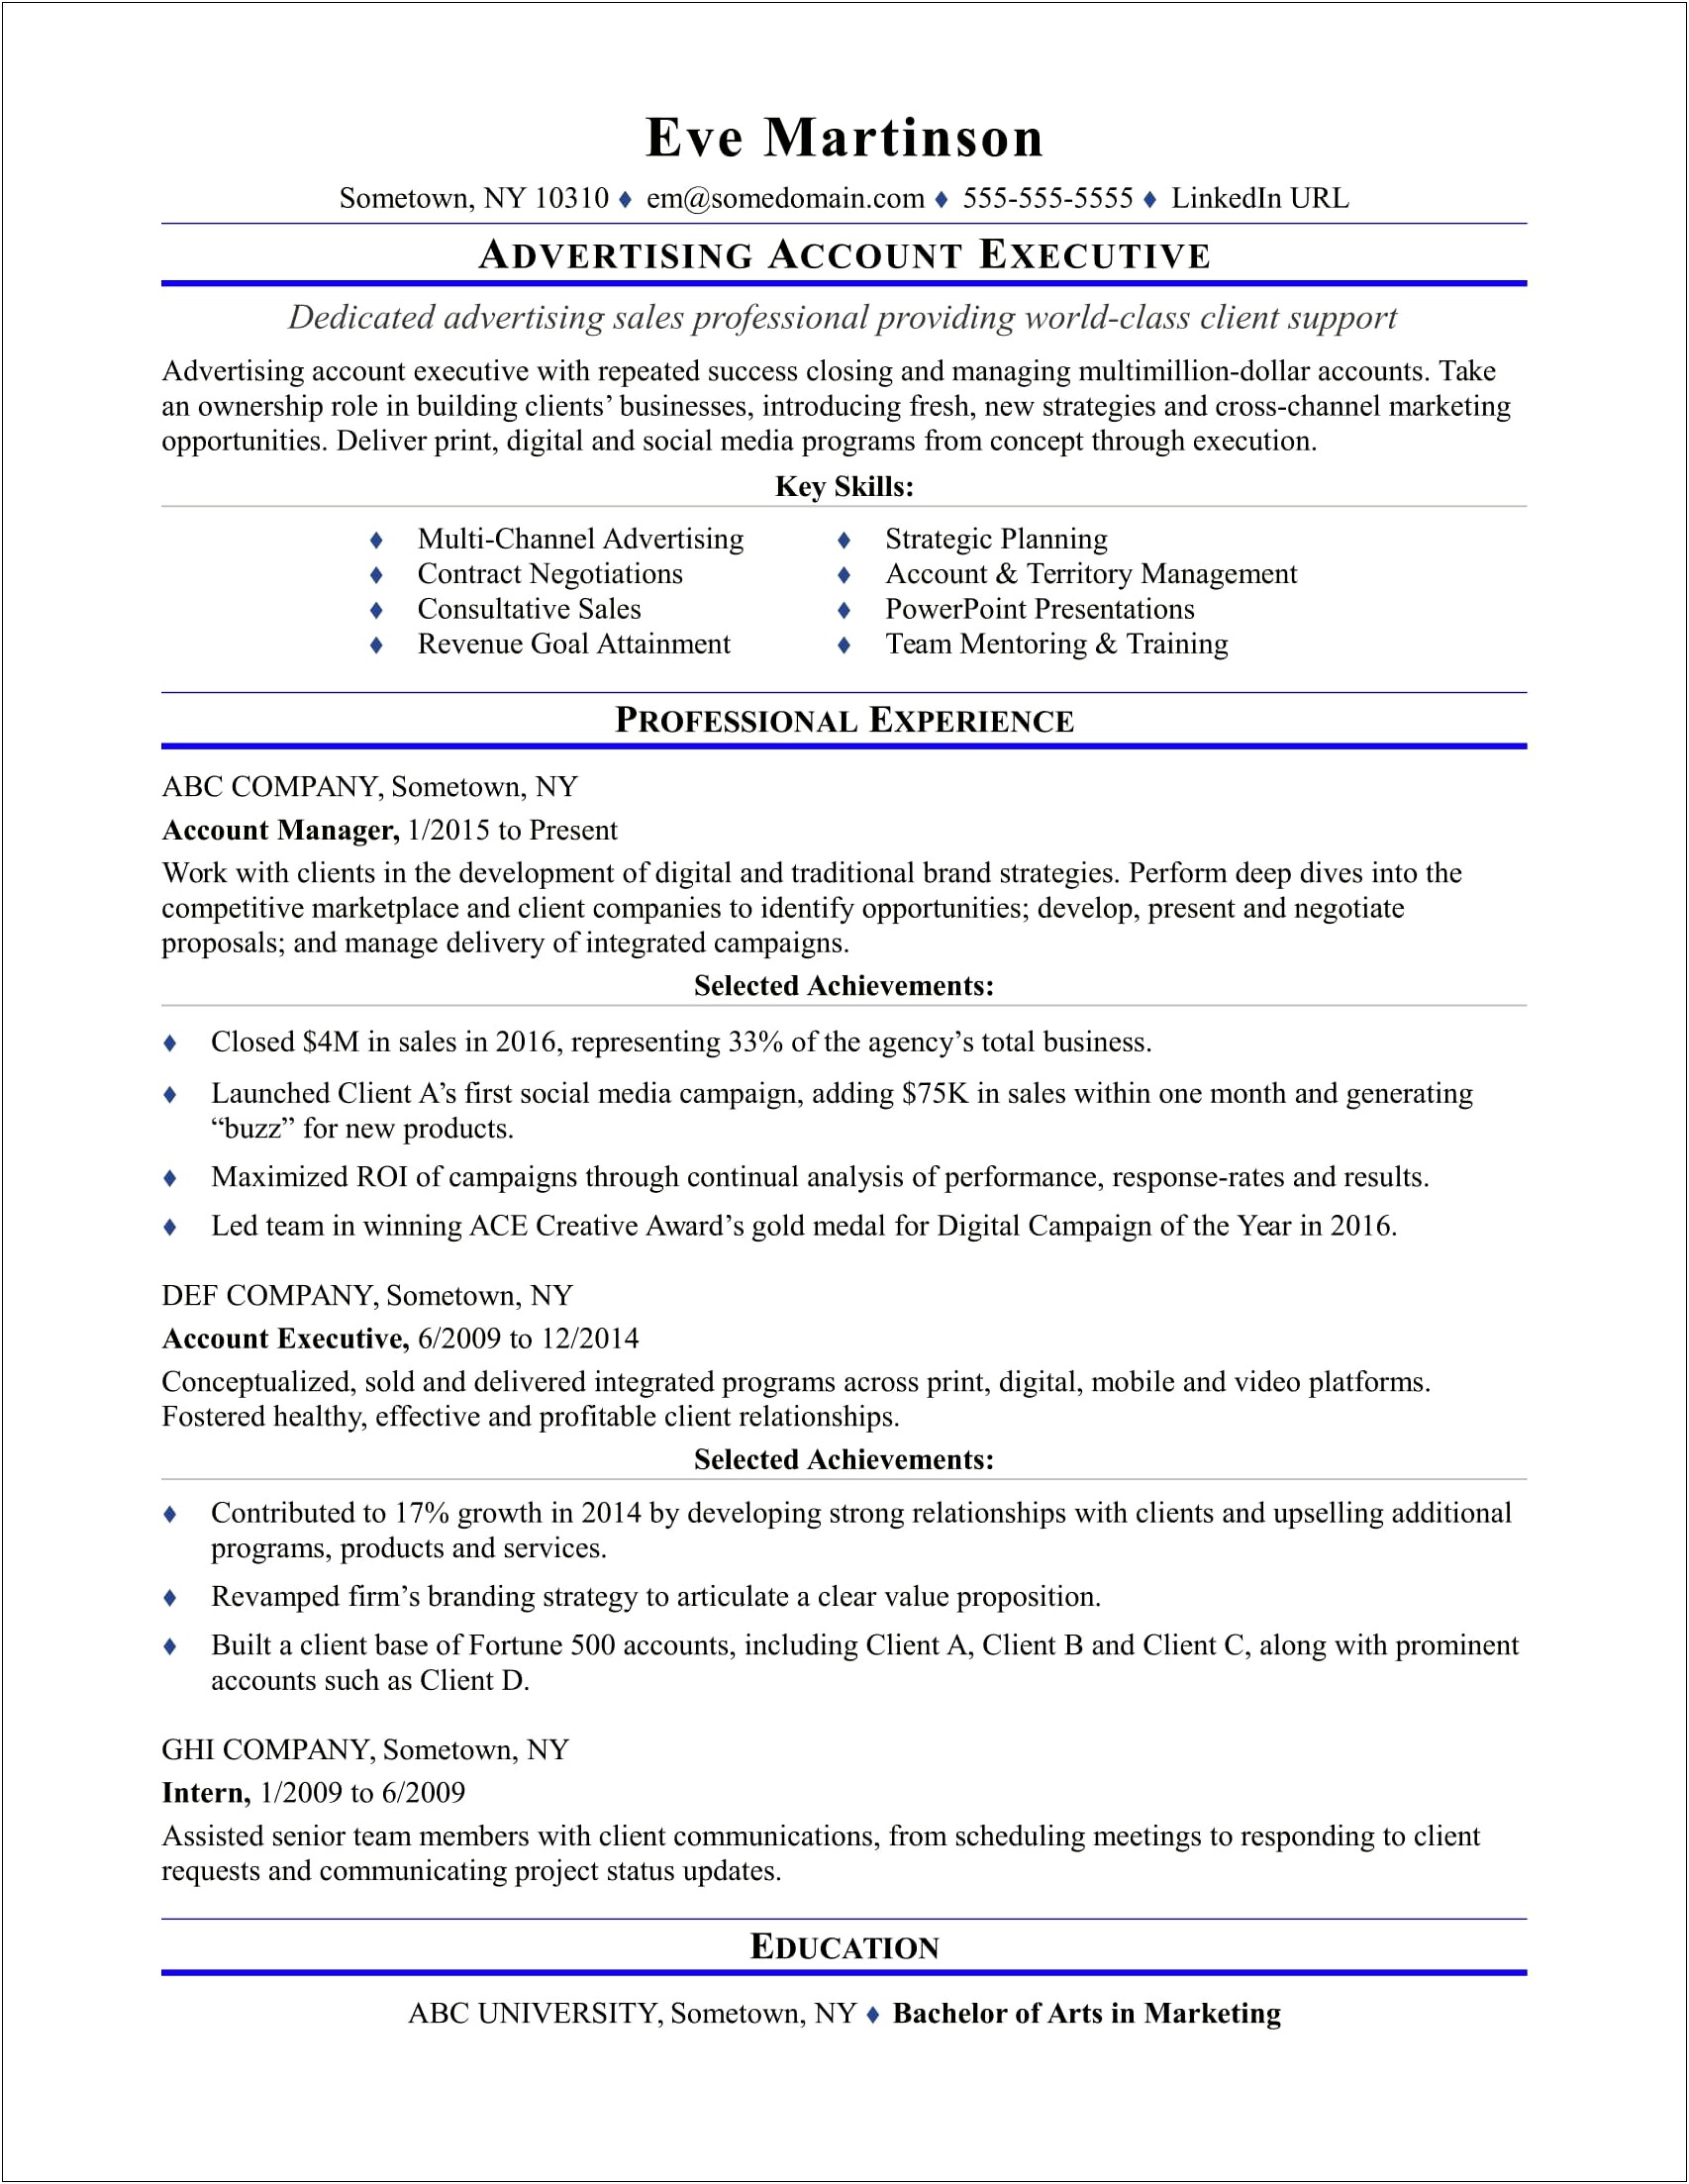 Example Of Sales Account Manager Resume